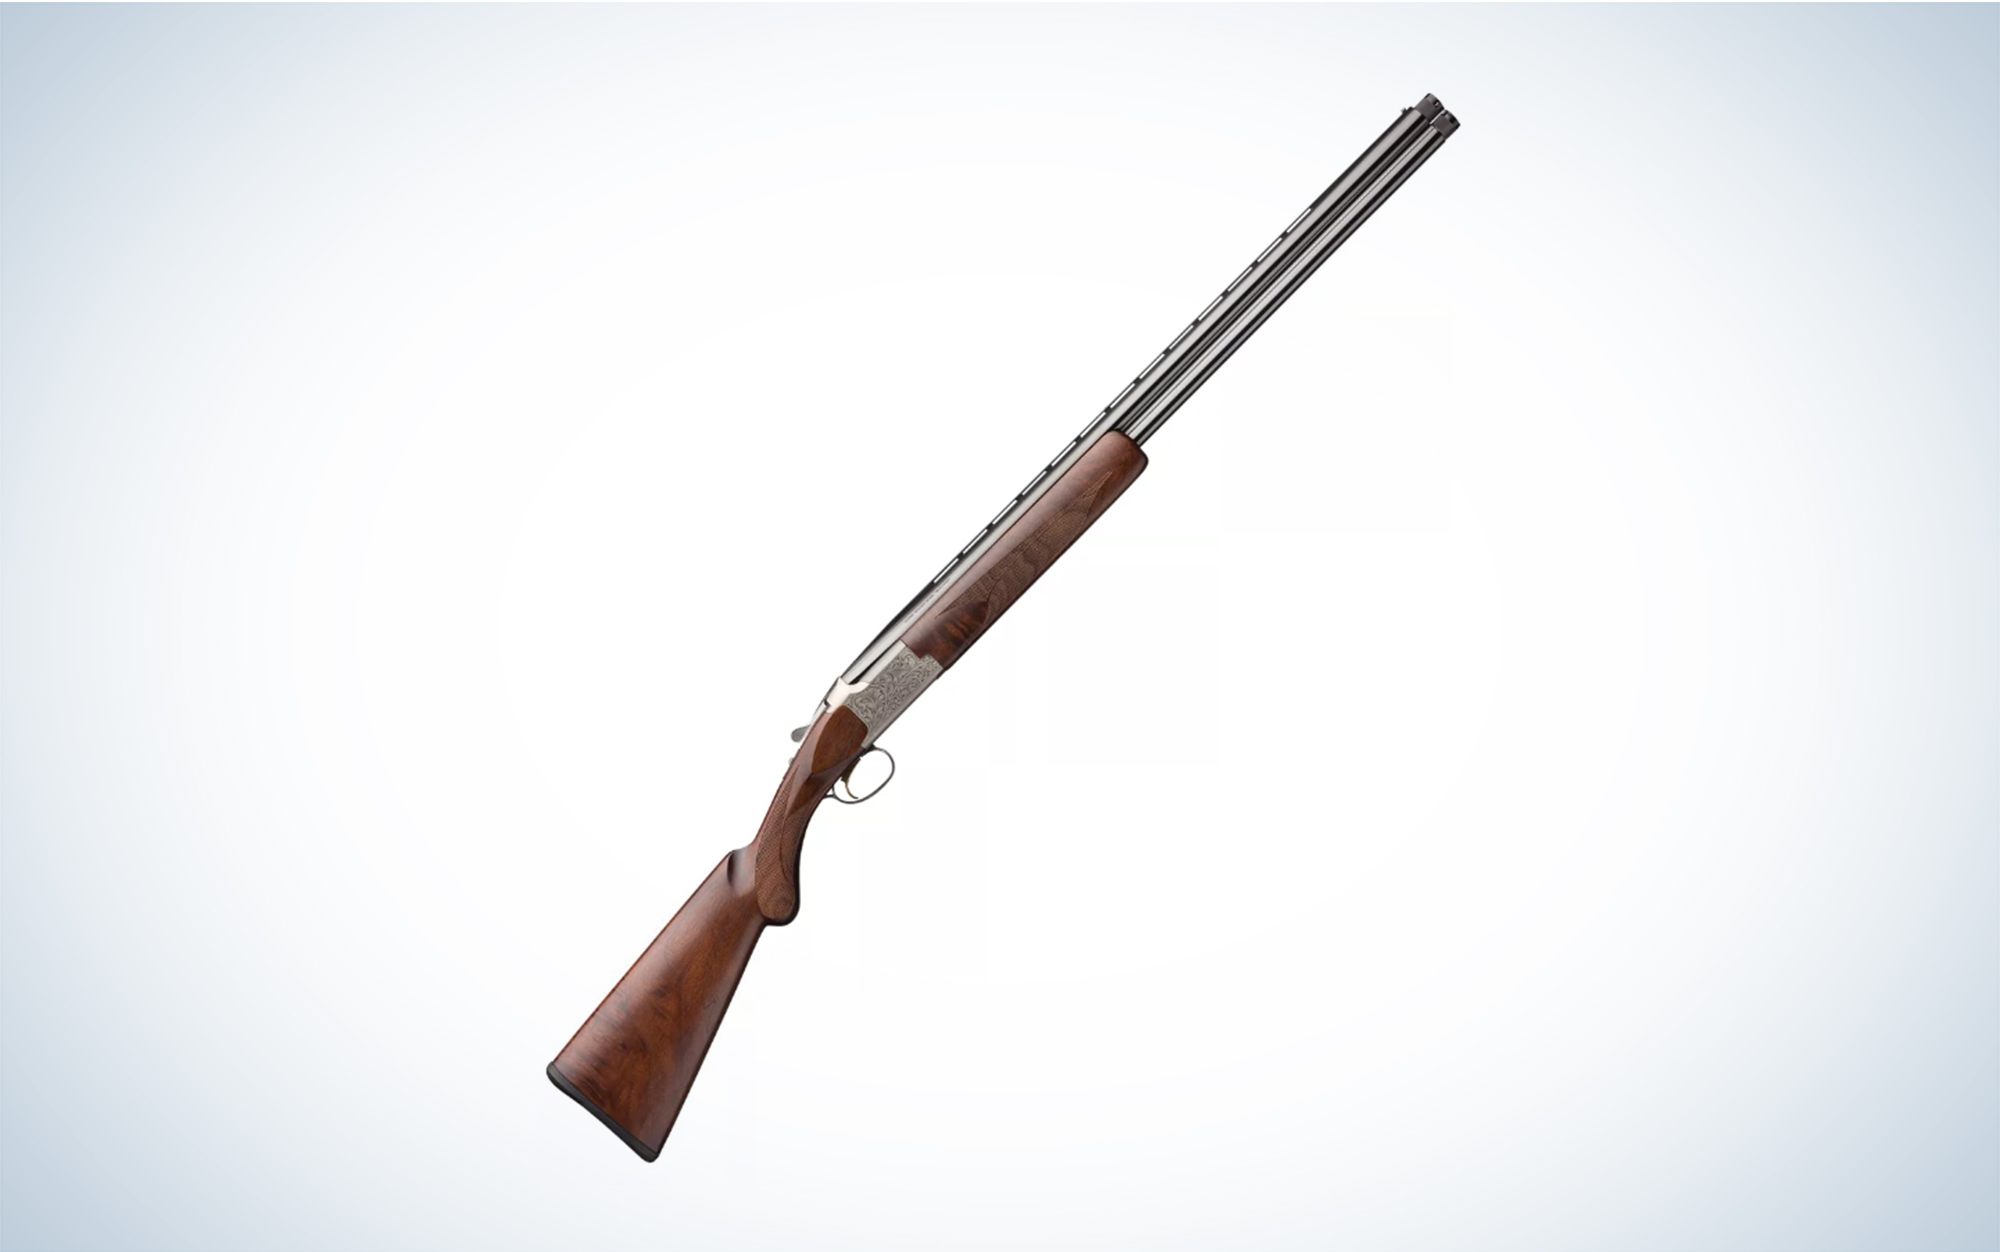 The Browning Citori is an over-under shotgun.